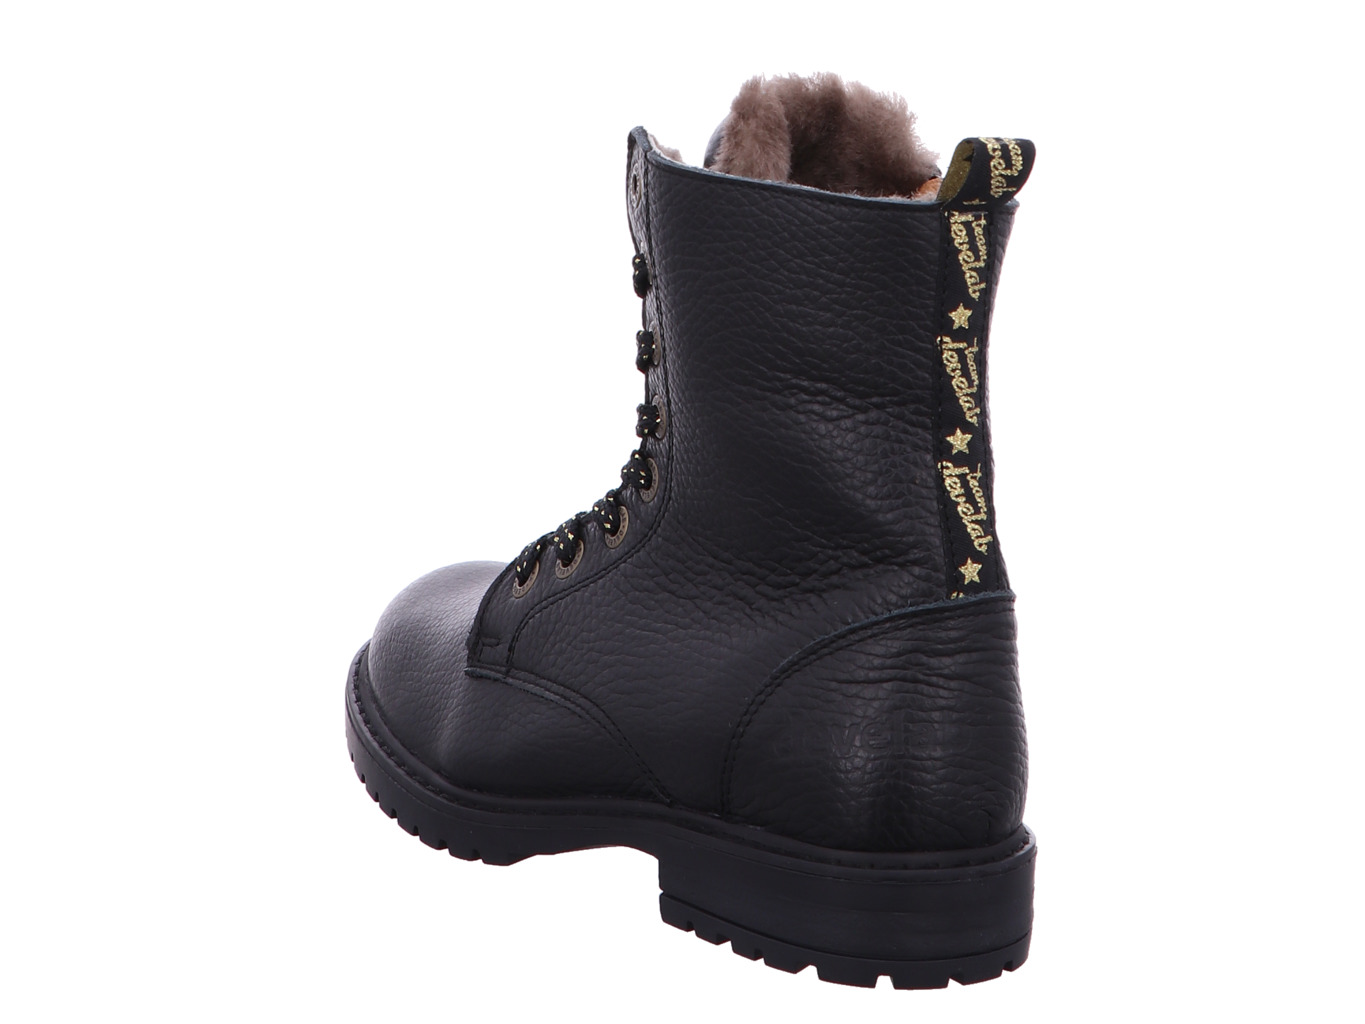 develab_girls_mid_boot_laces_42846_922_5135